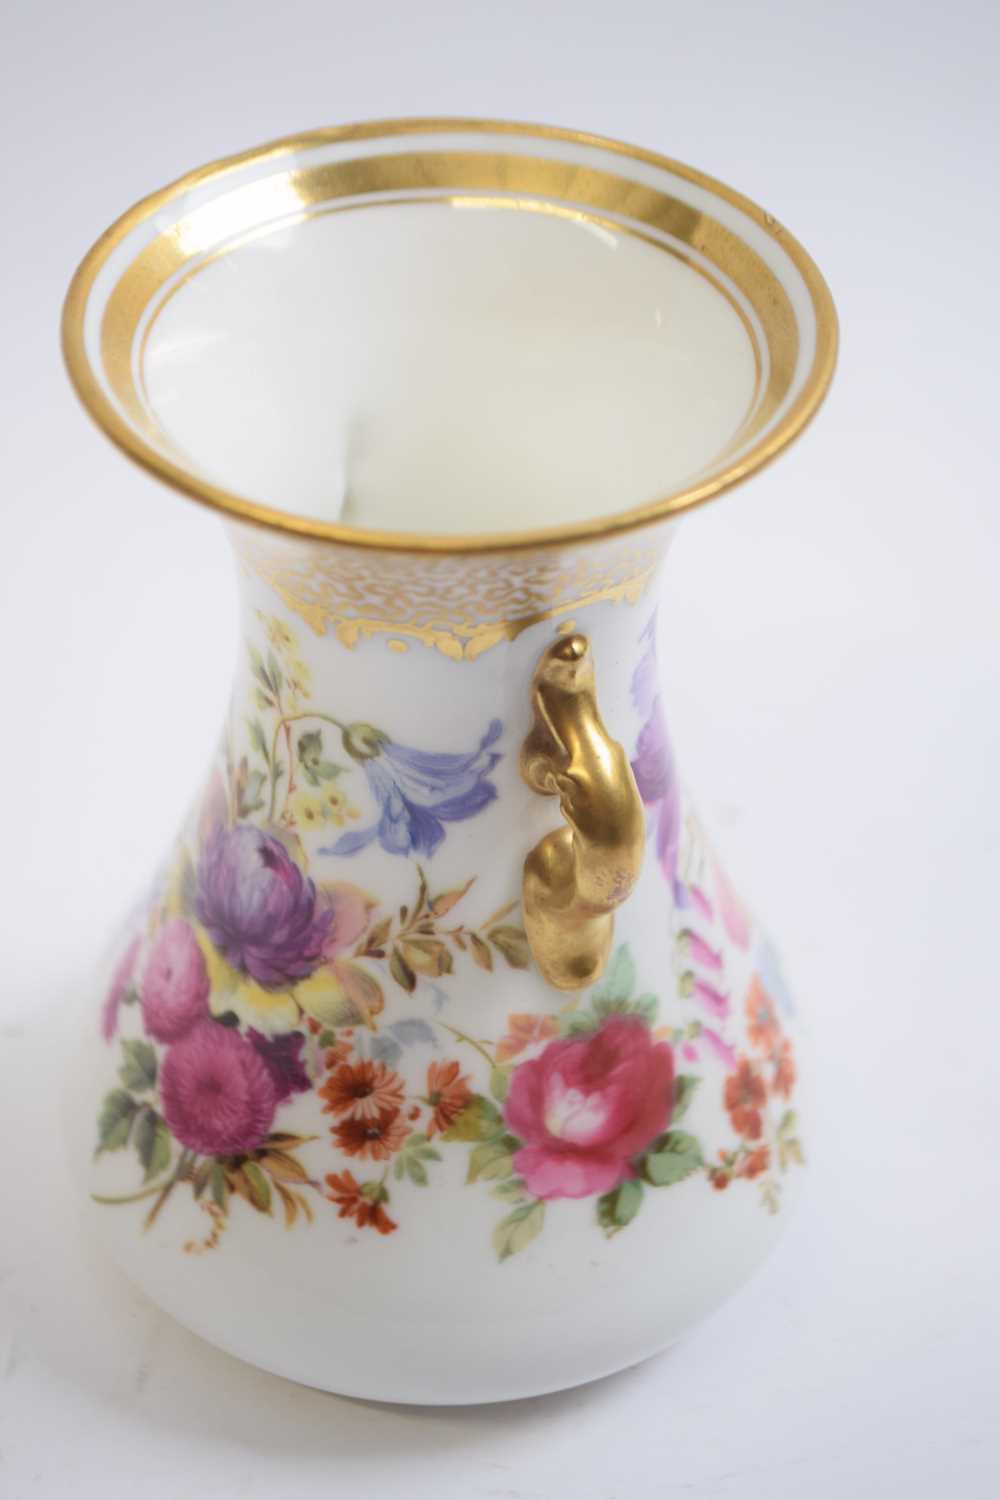 Small Royal Doulton porcelain vase with painted floral decoration, signed T E Wood, 11cm high - Image 2 of 3